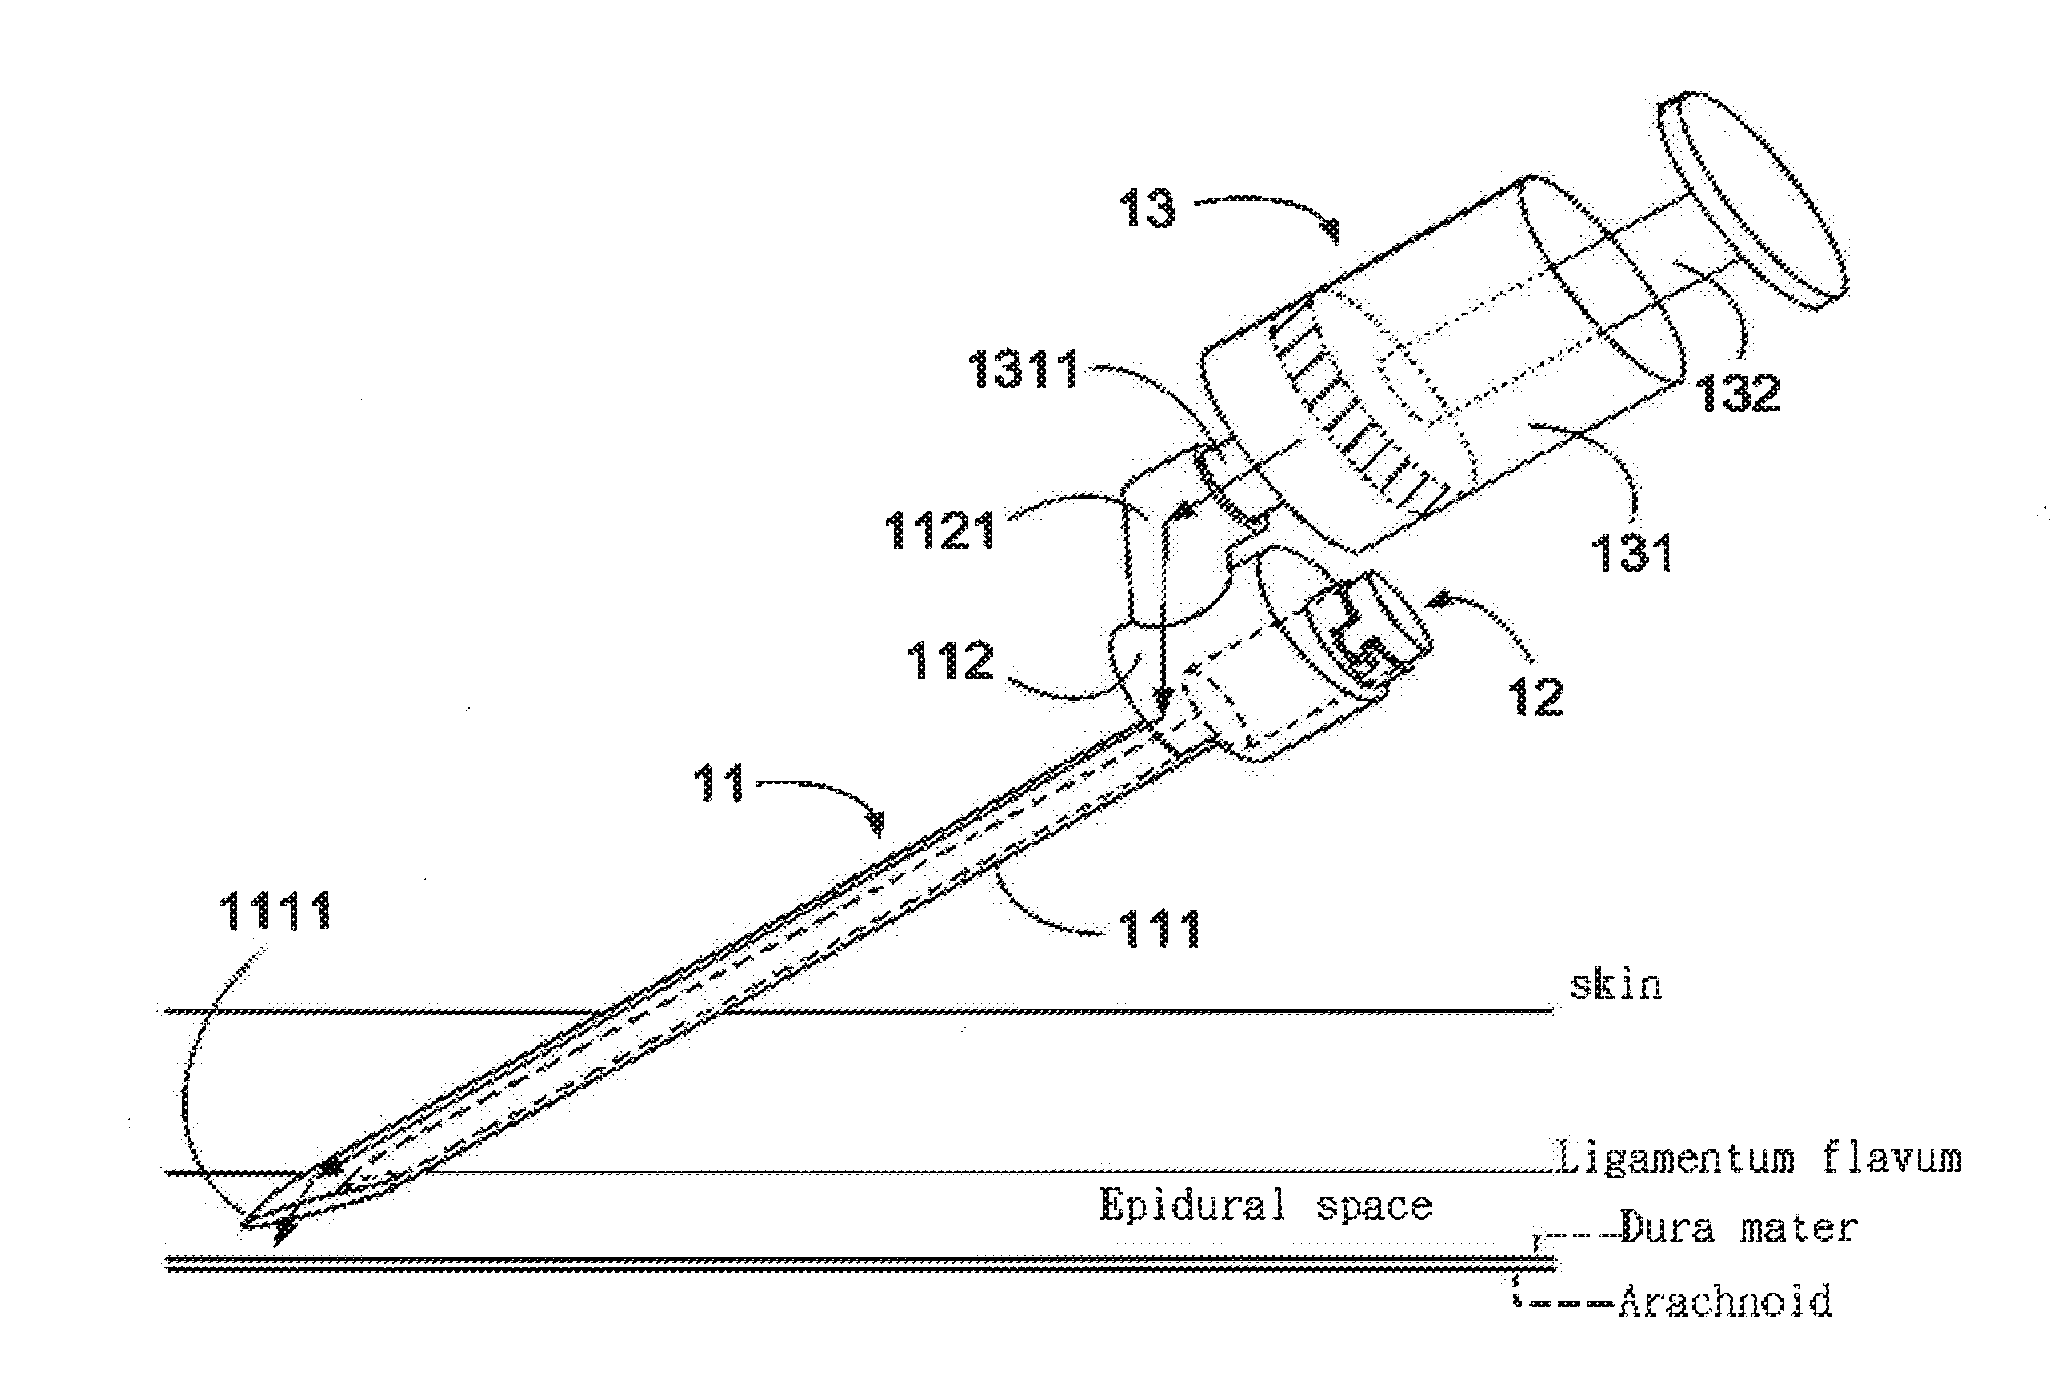 Ultrasonic positioning device for epidural space and method using the same